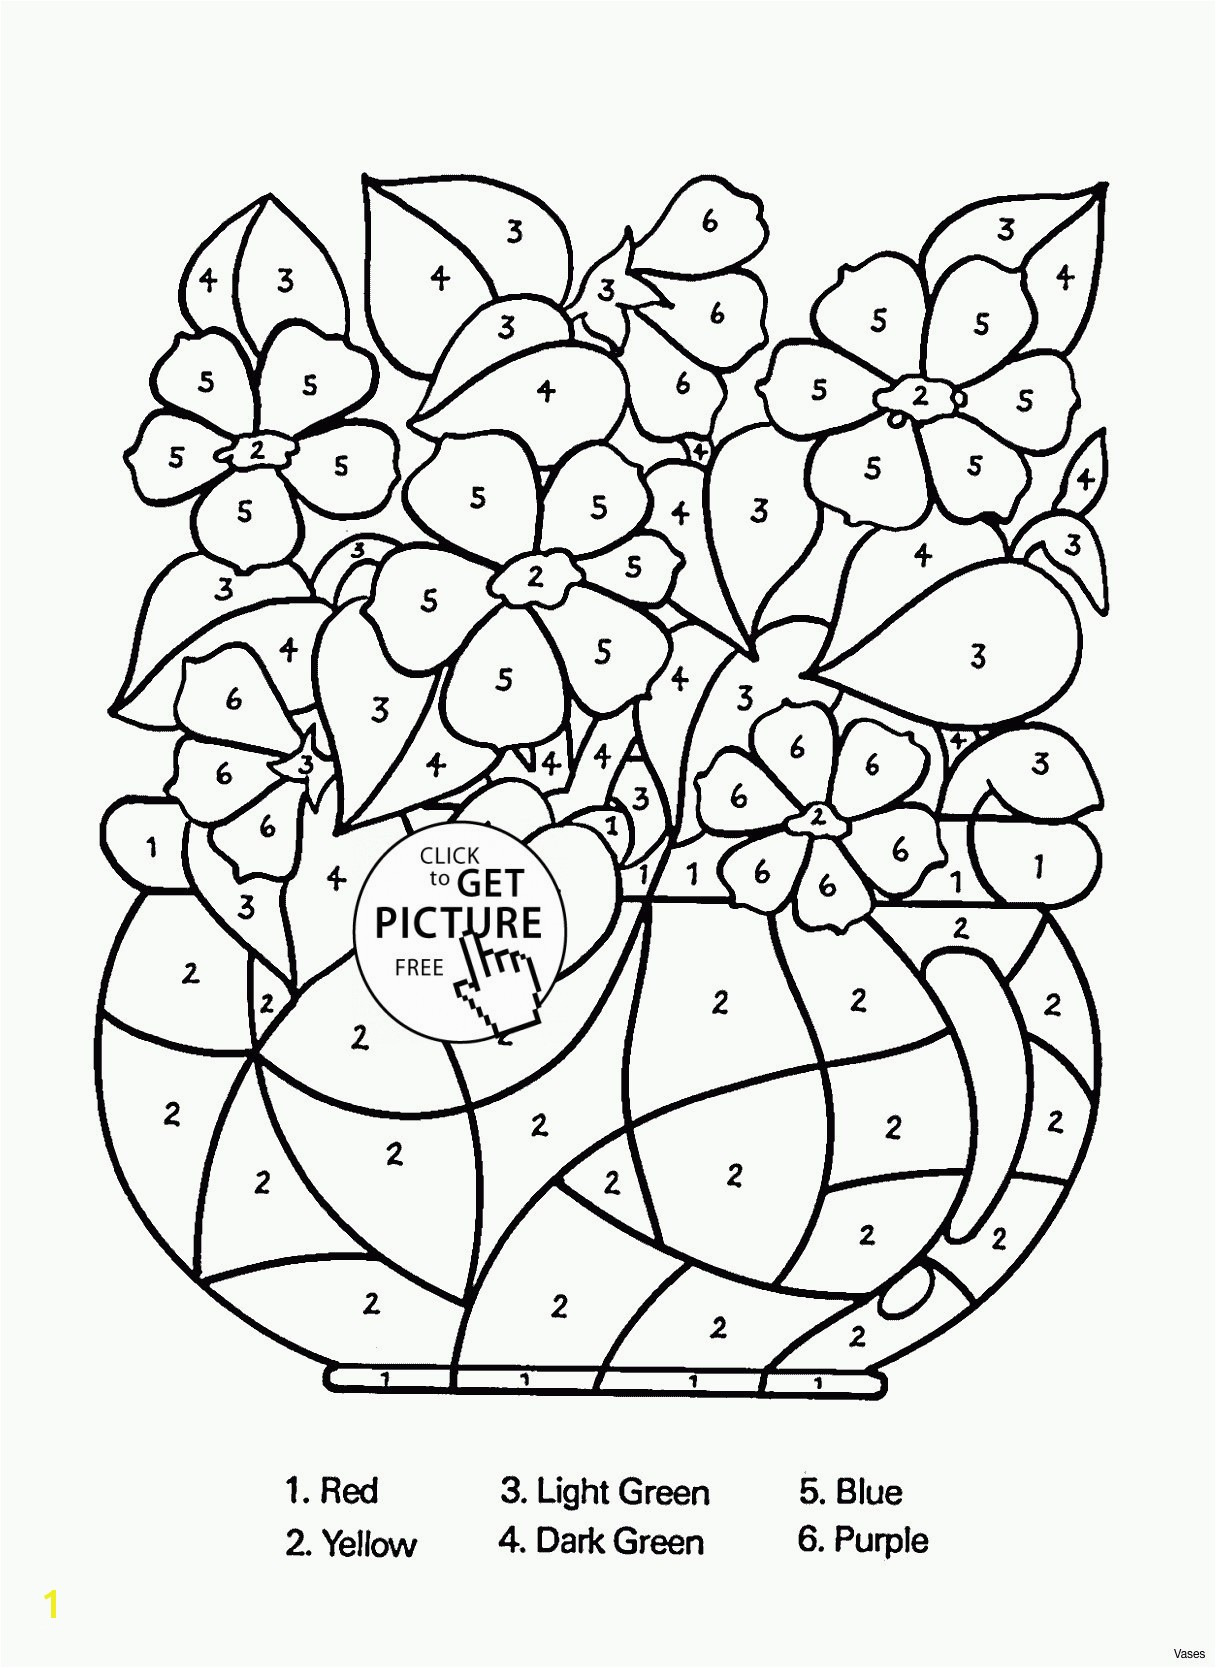 Ziggurat Coloring Page Ziggurat Coloring Page 20 Inspirational Hamster Coloring Pages